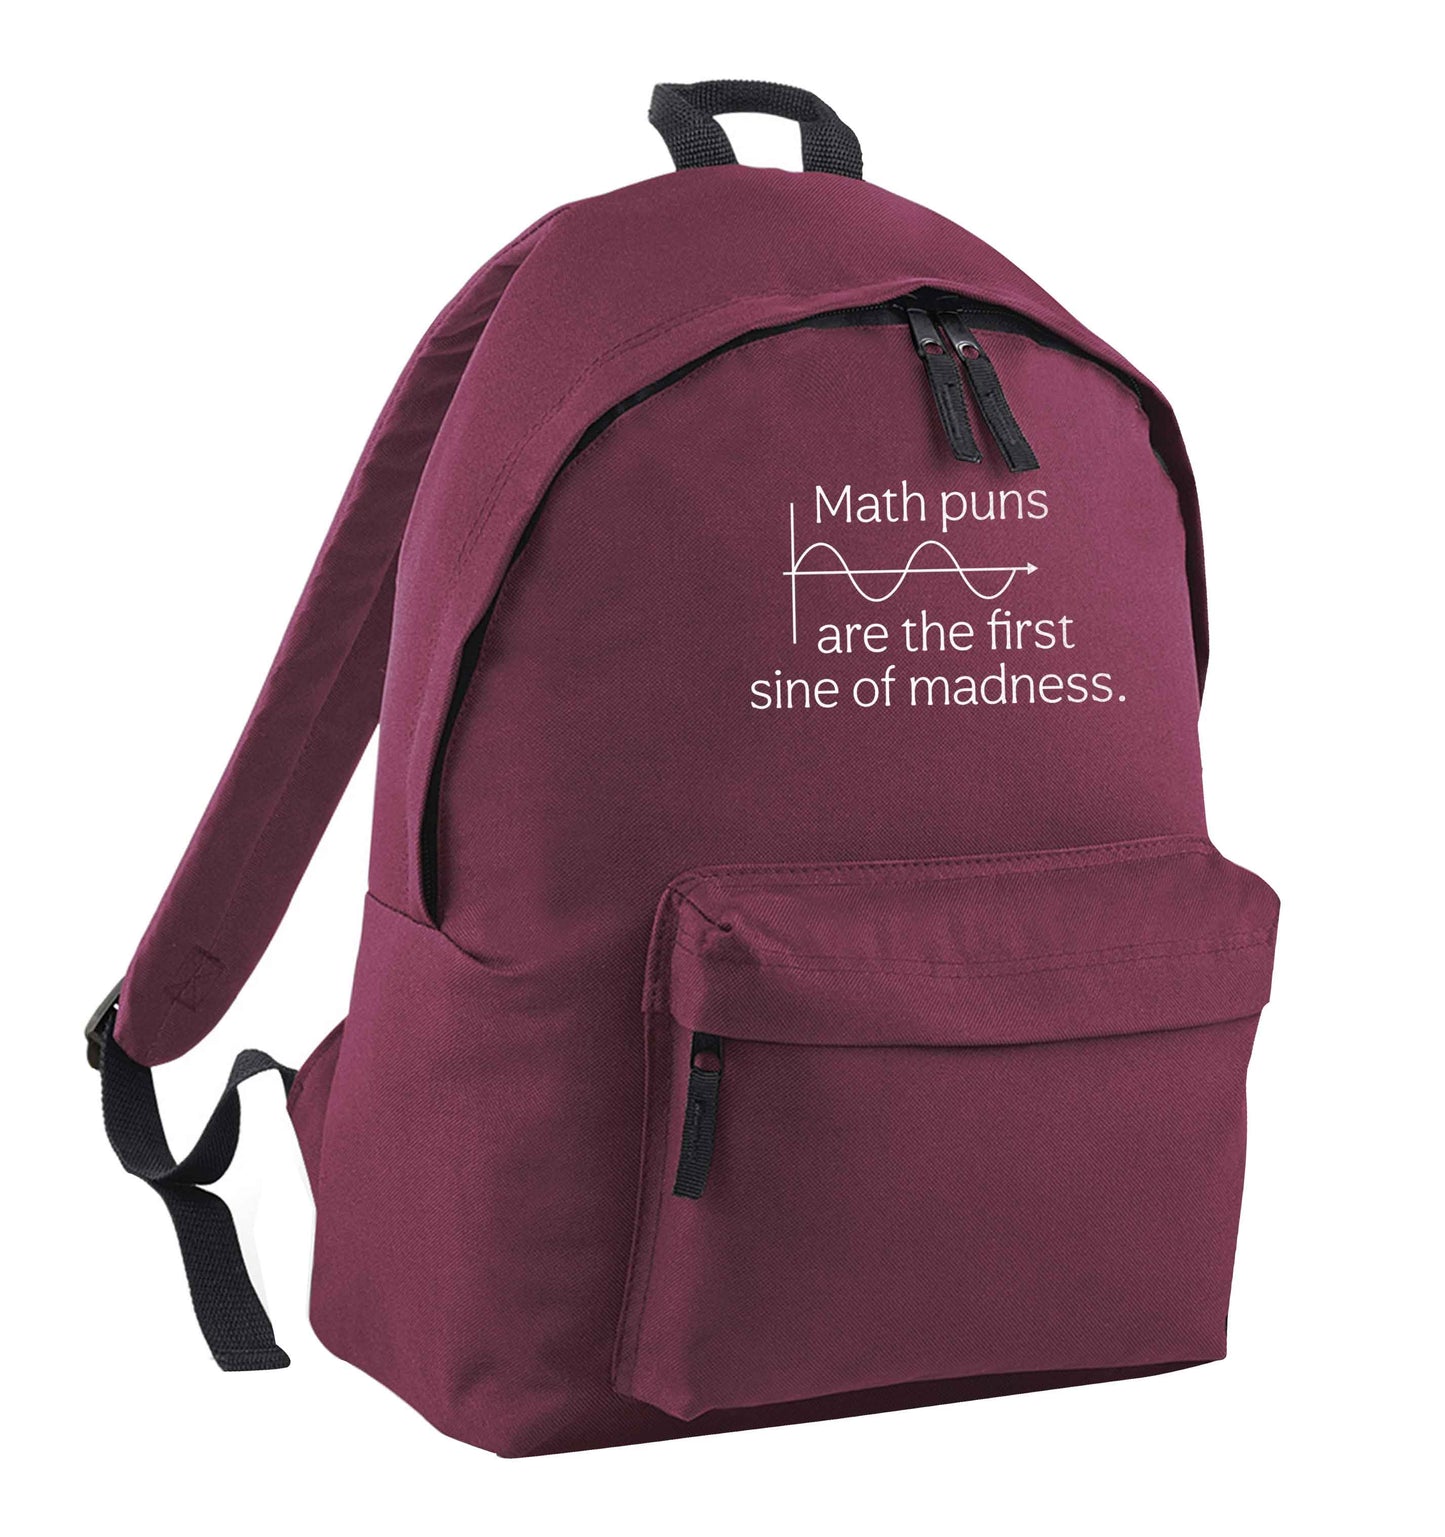 Math puns are the first sine of madness maroon children's backpack